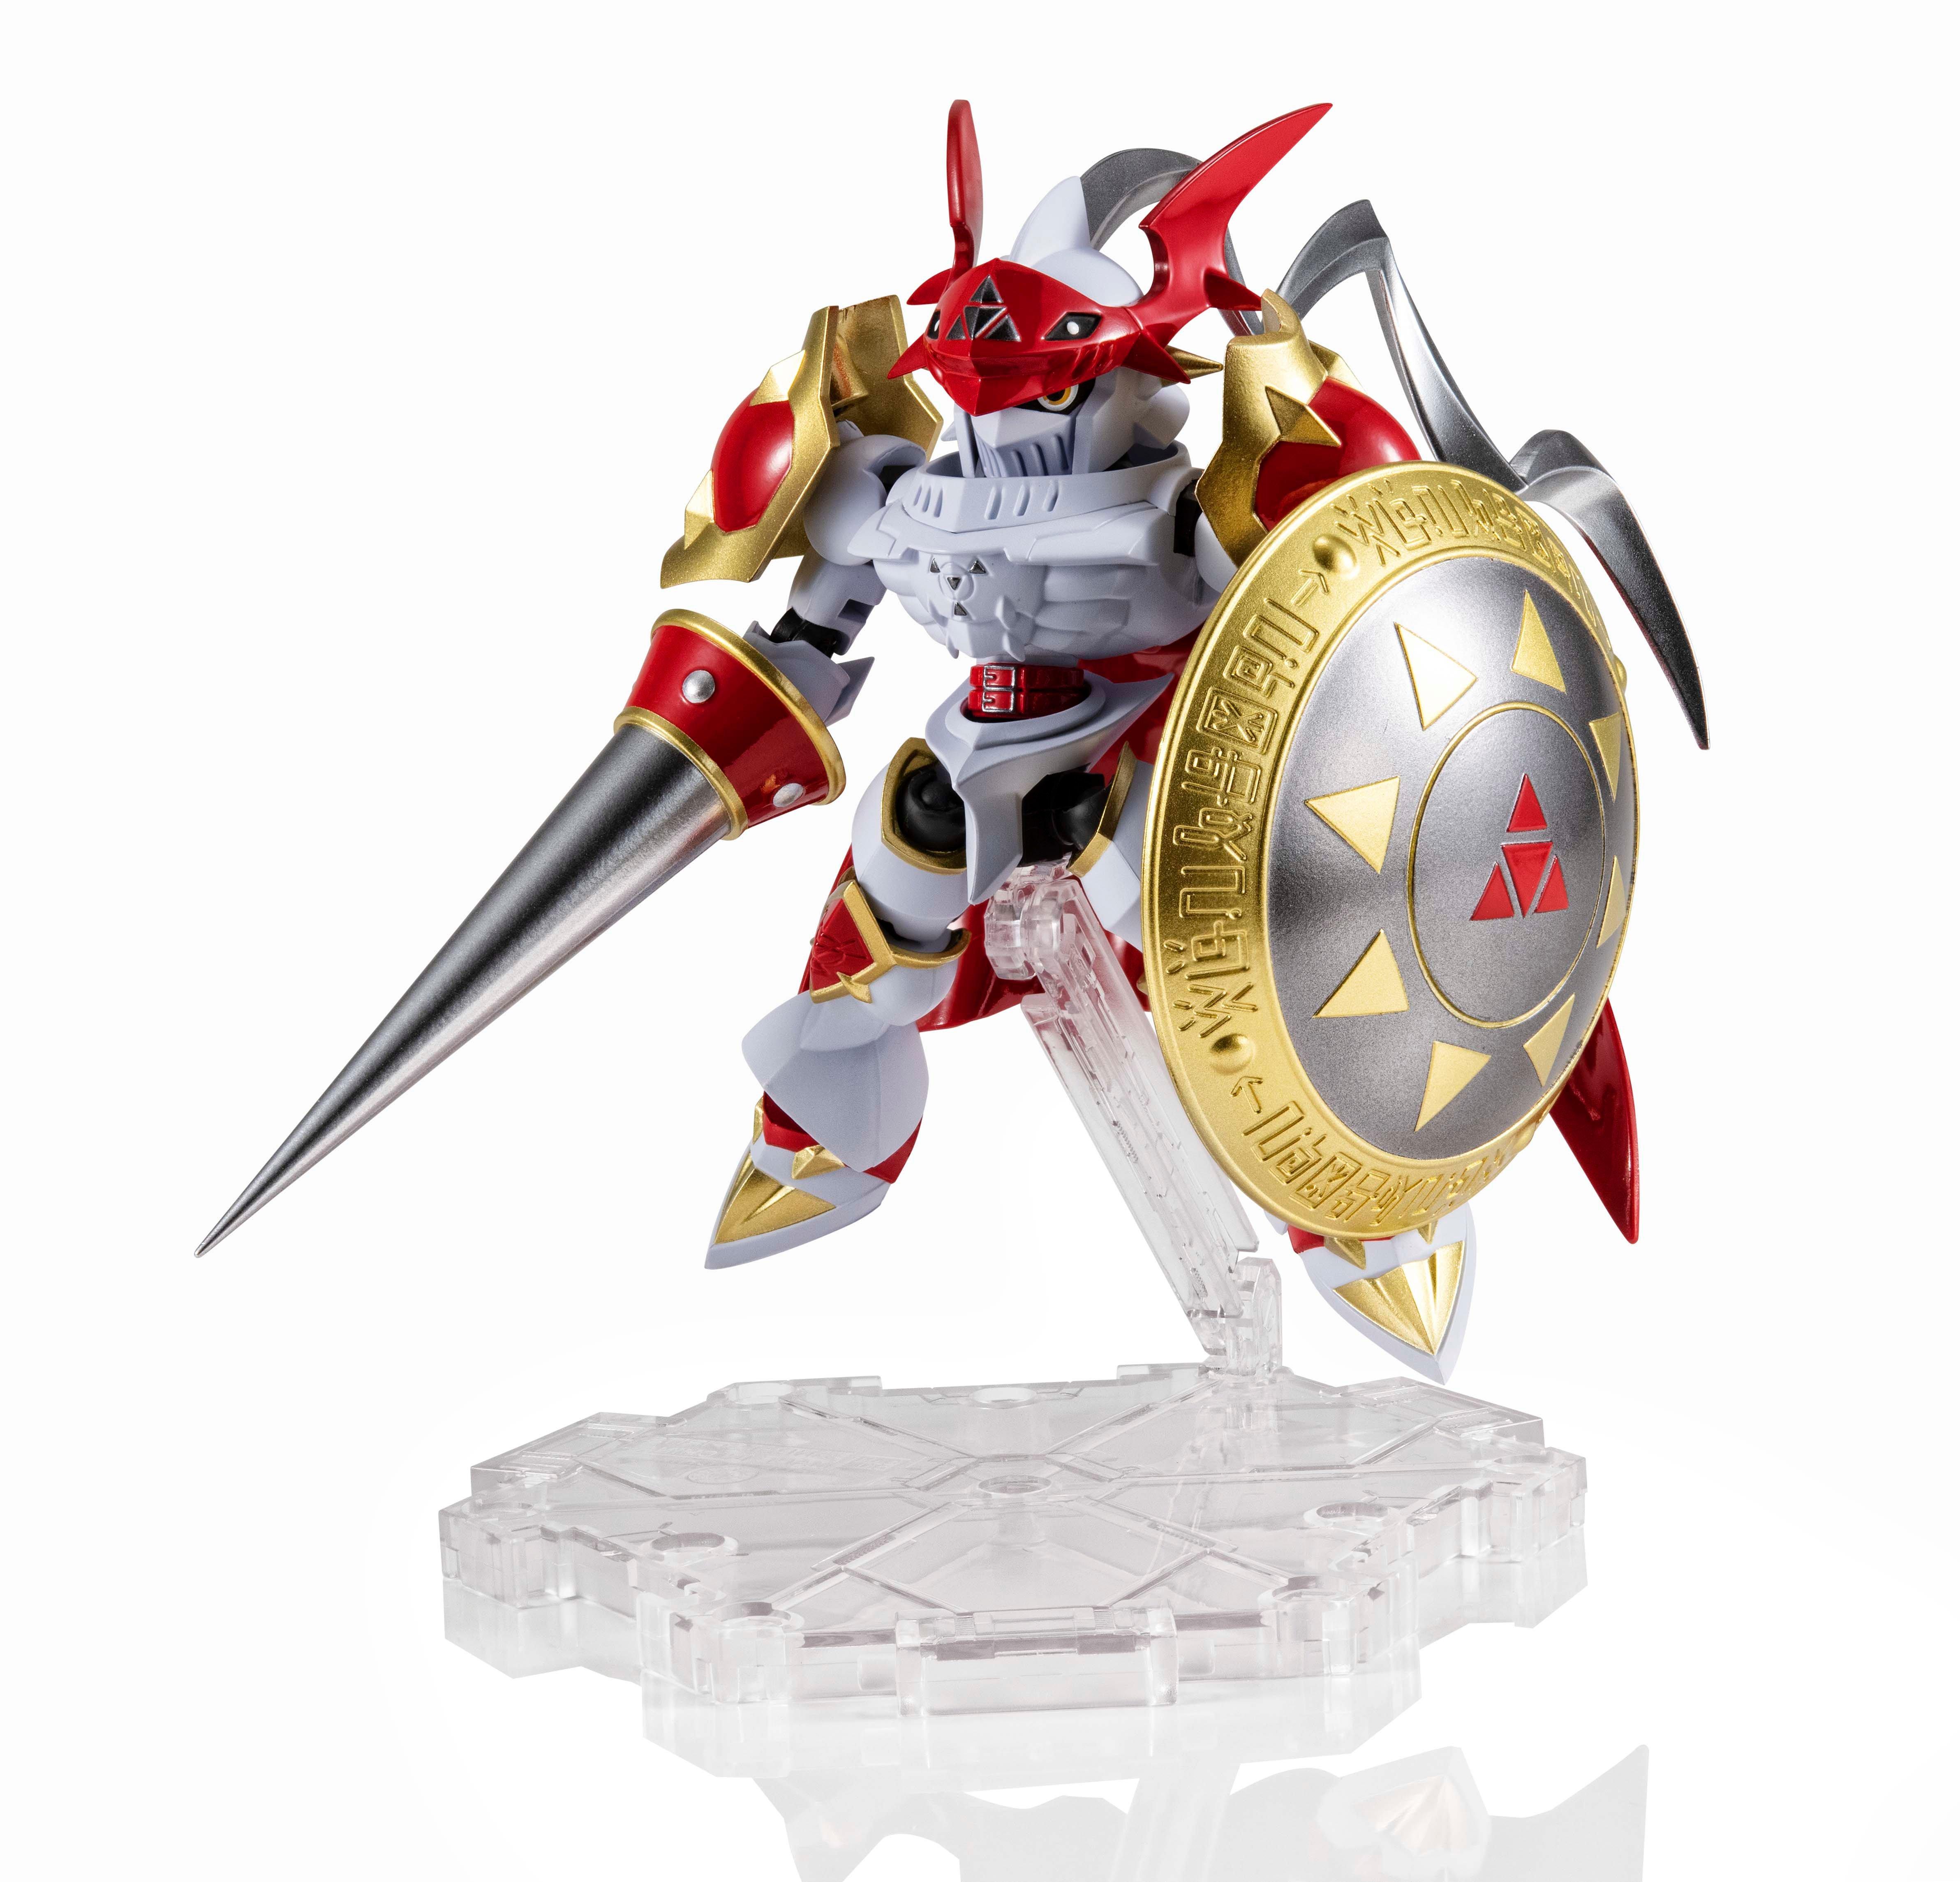 Bandai NXEDGE Style Digimon Tamers Dukemon Special Color Version 7-In Action Figure